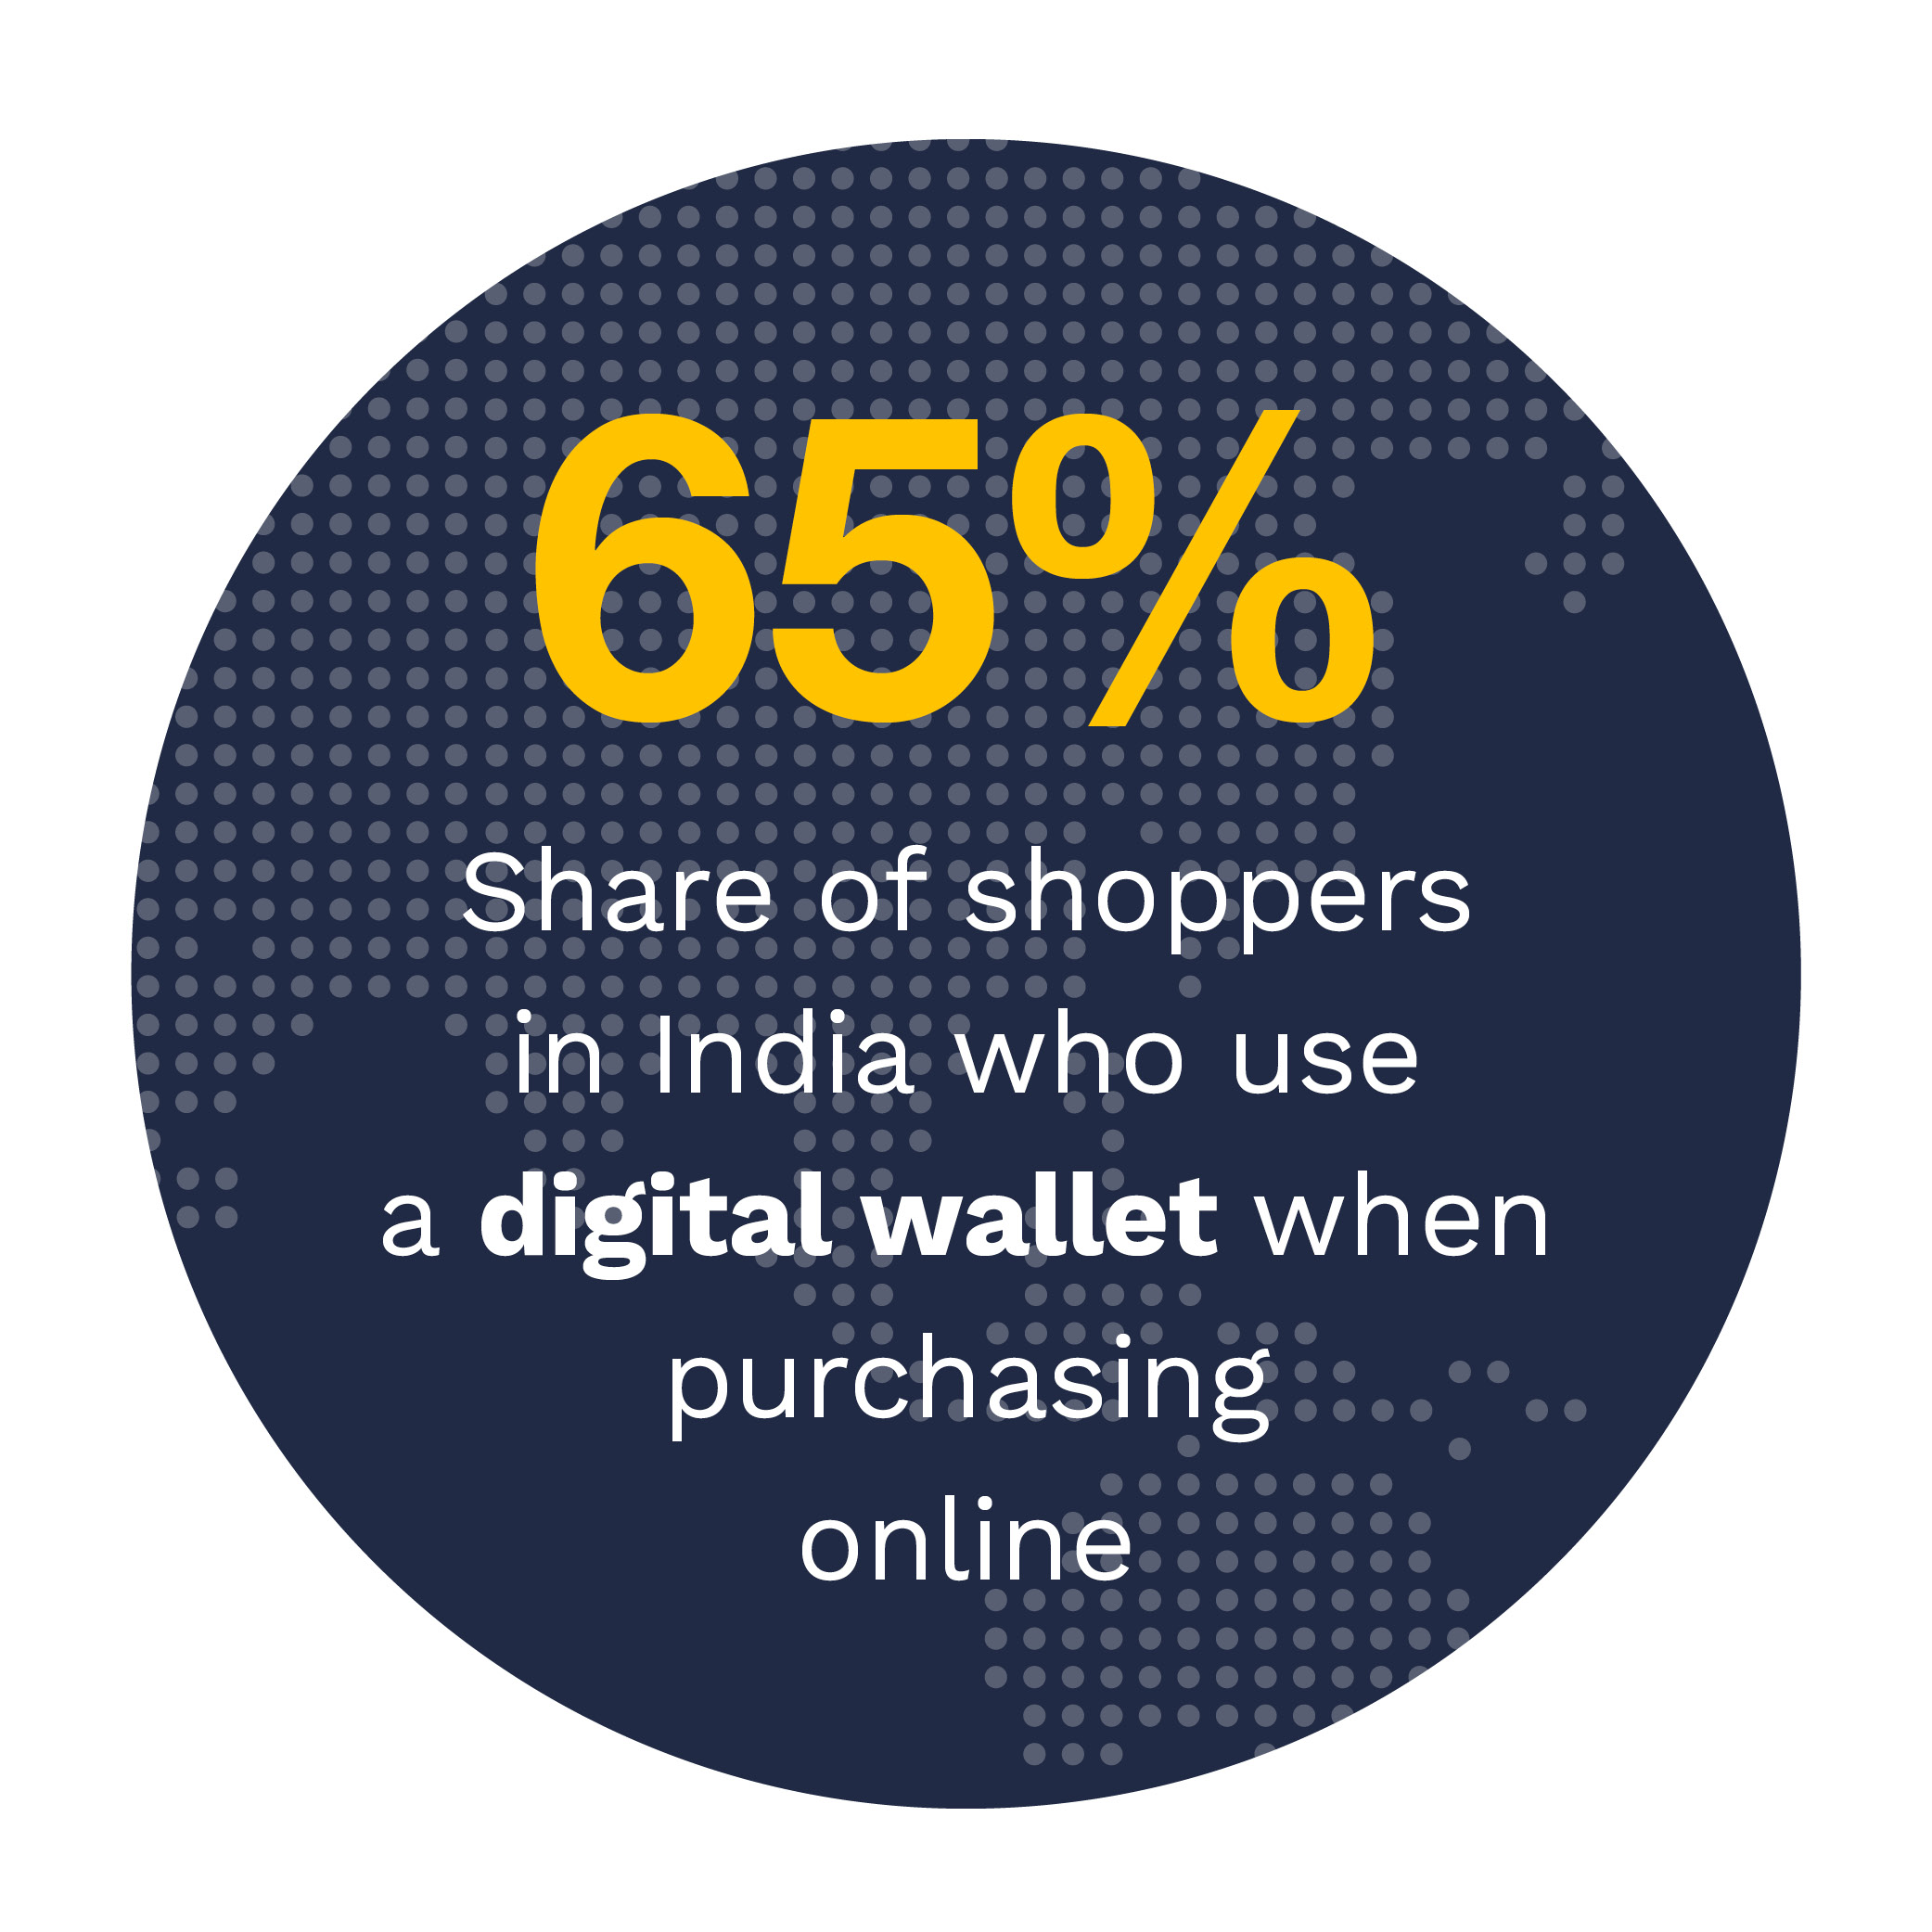 65%: Share of shoppers in India who use a digital wallet when purchasing online